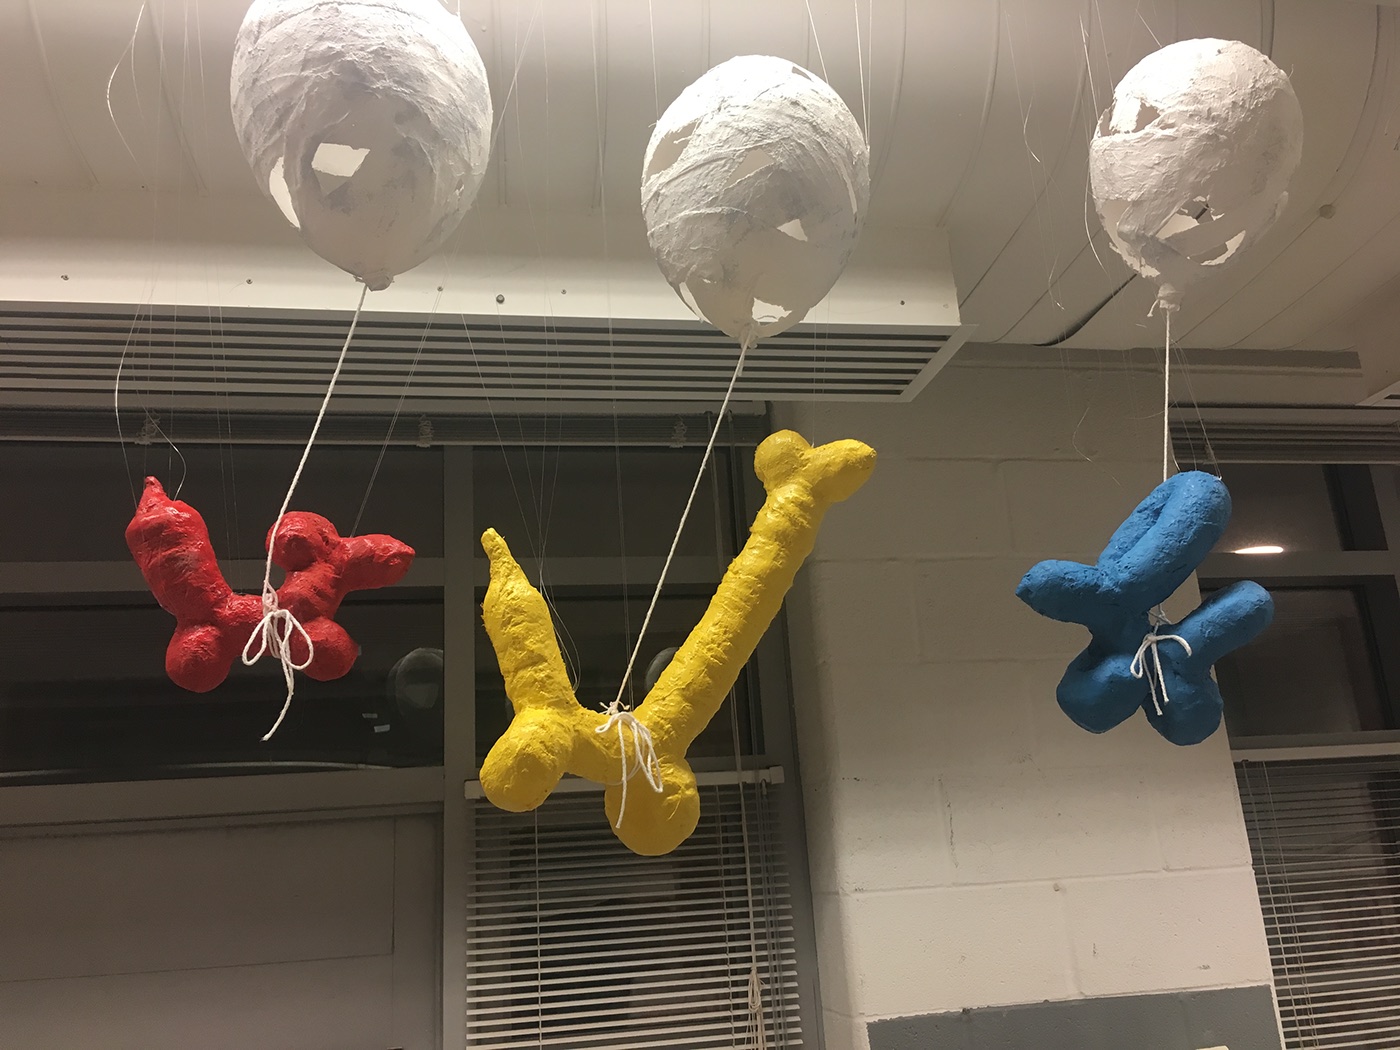 spray paint balloon plaster sculpture red blue yellow animals hanging suspended illusion